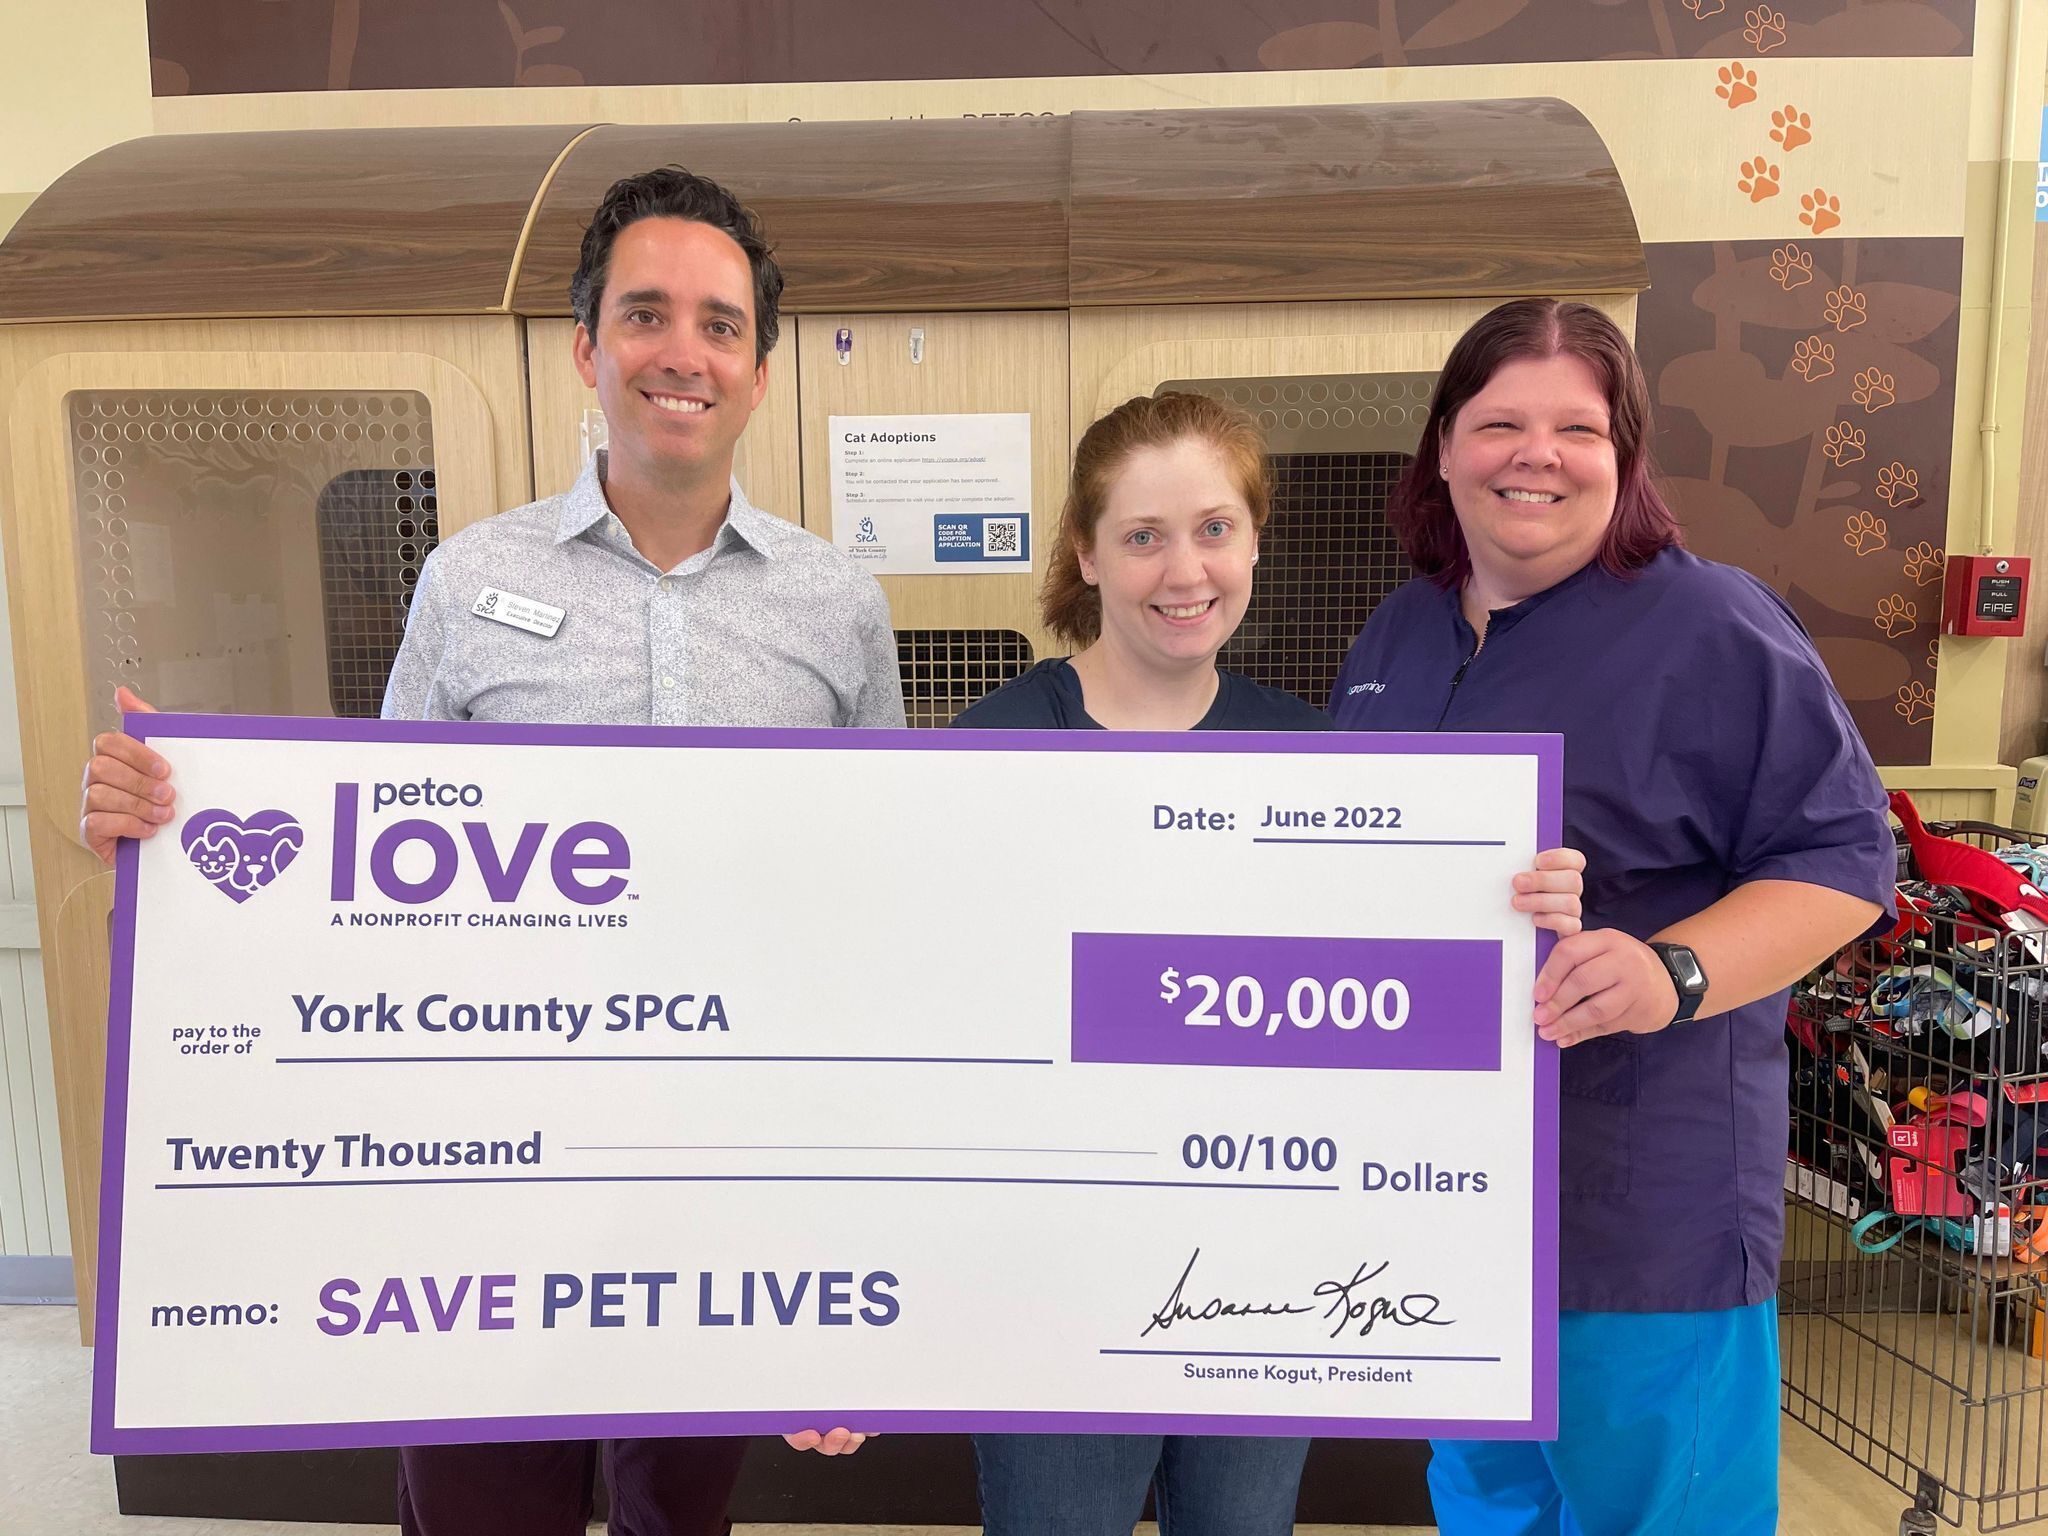 The Petco Love Foundation Invests in the York County SPCA To Save and Improve the Lives of Pets in York County